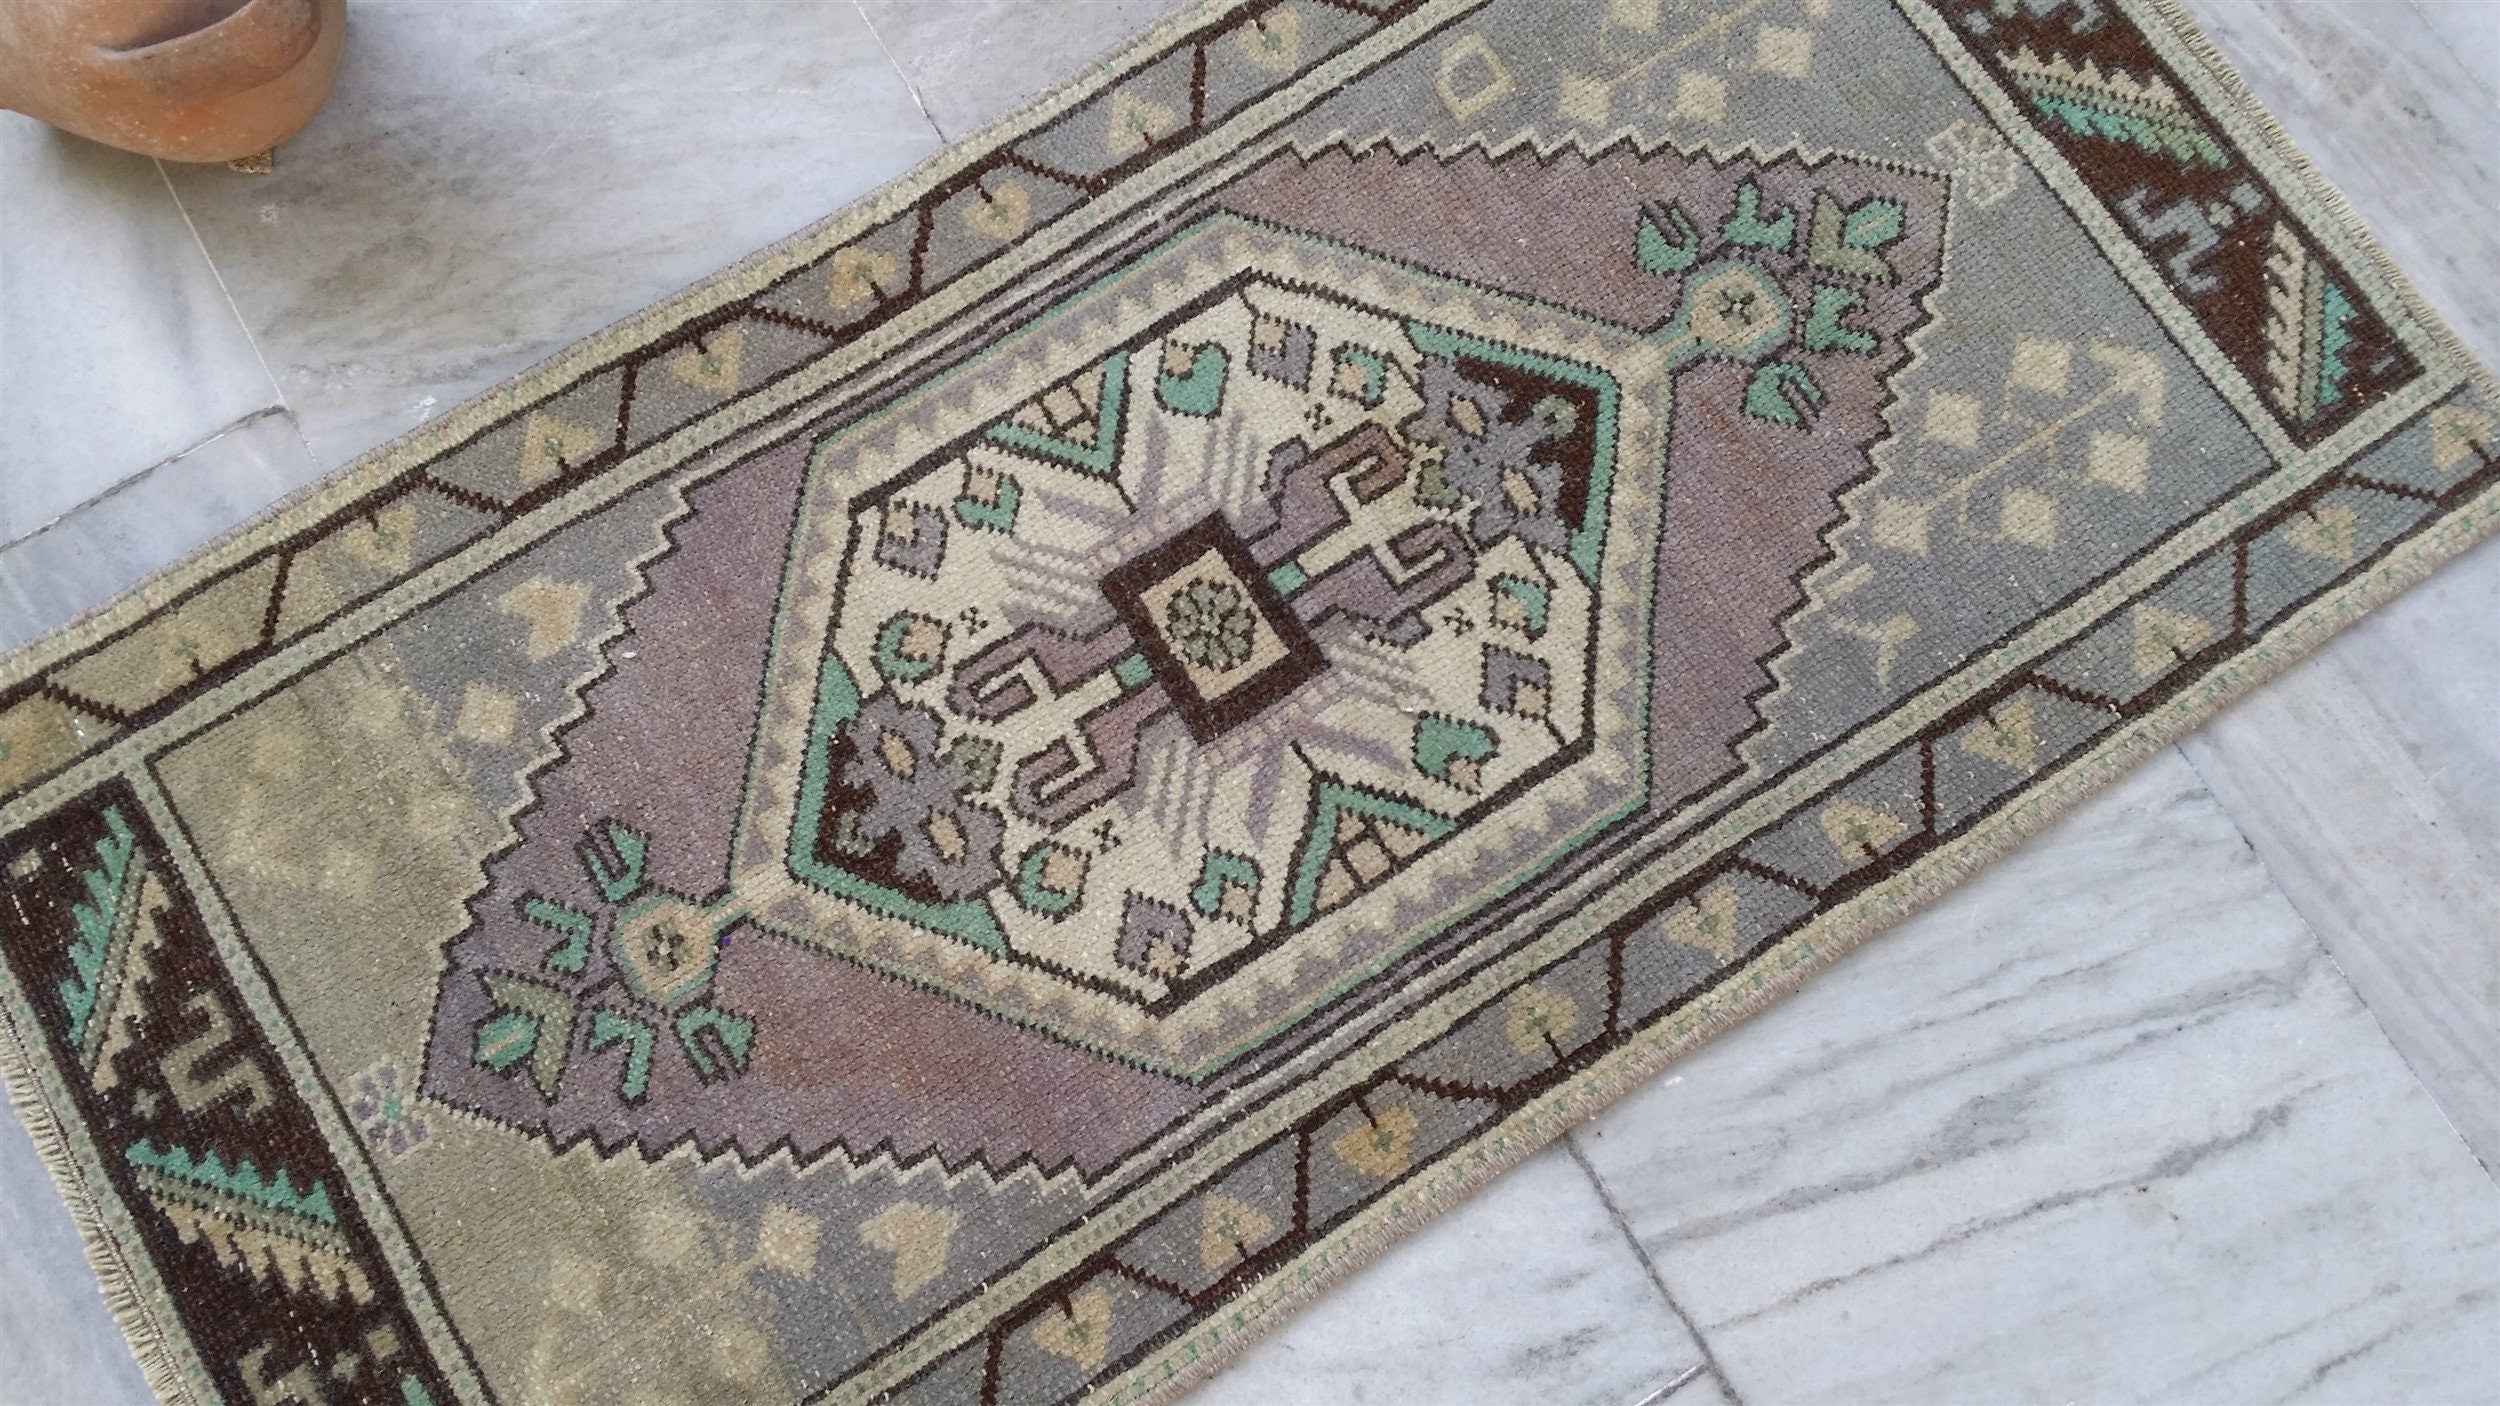 Vintage Turkish Small Rug, 3 ft 2 in x 1 ft 7 in, Pink, Green/Grey and Beige Faded Distressed Antique Style Mat